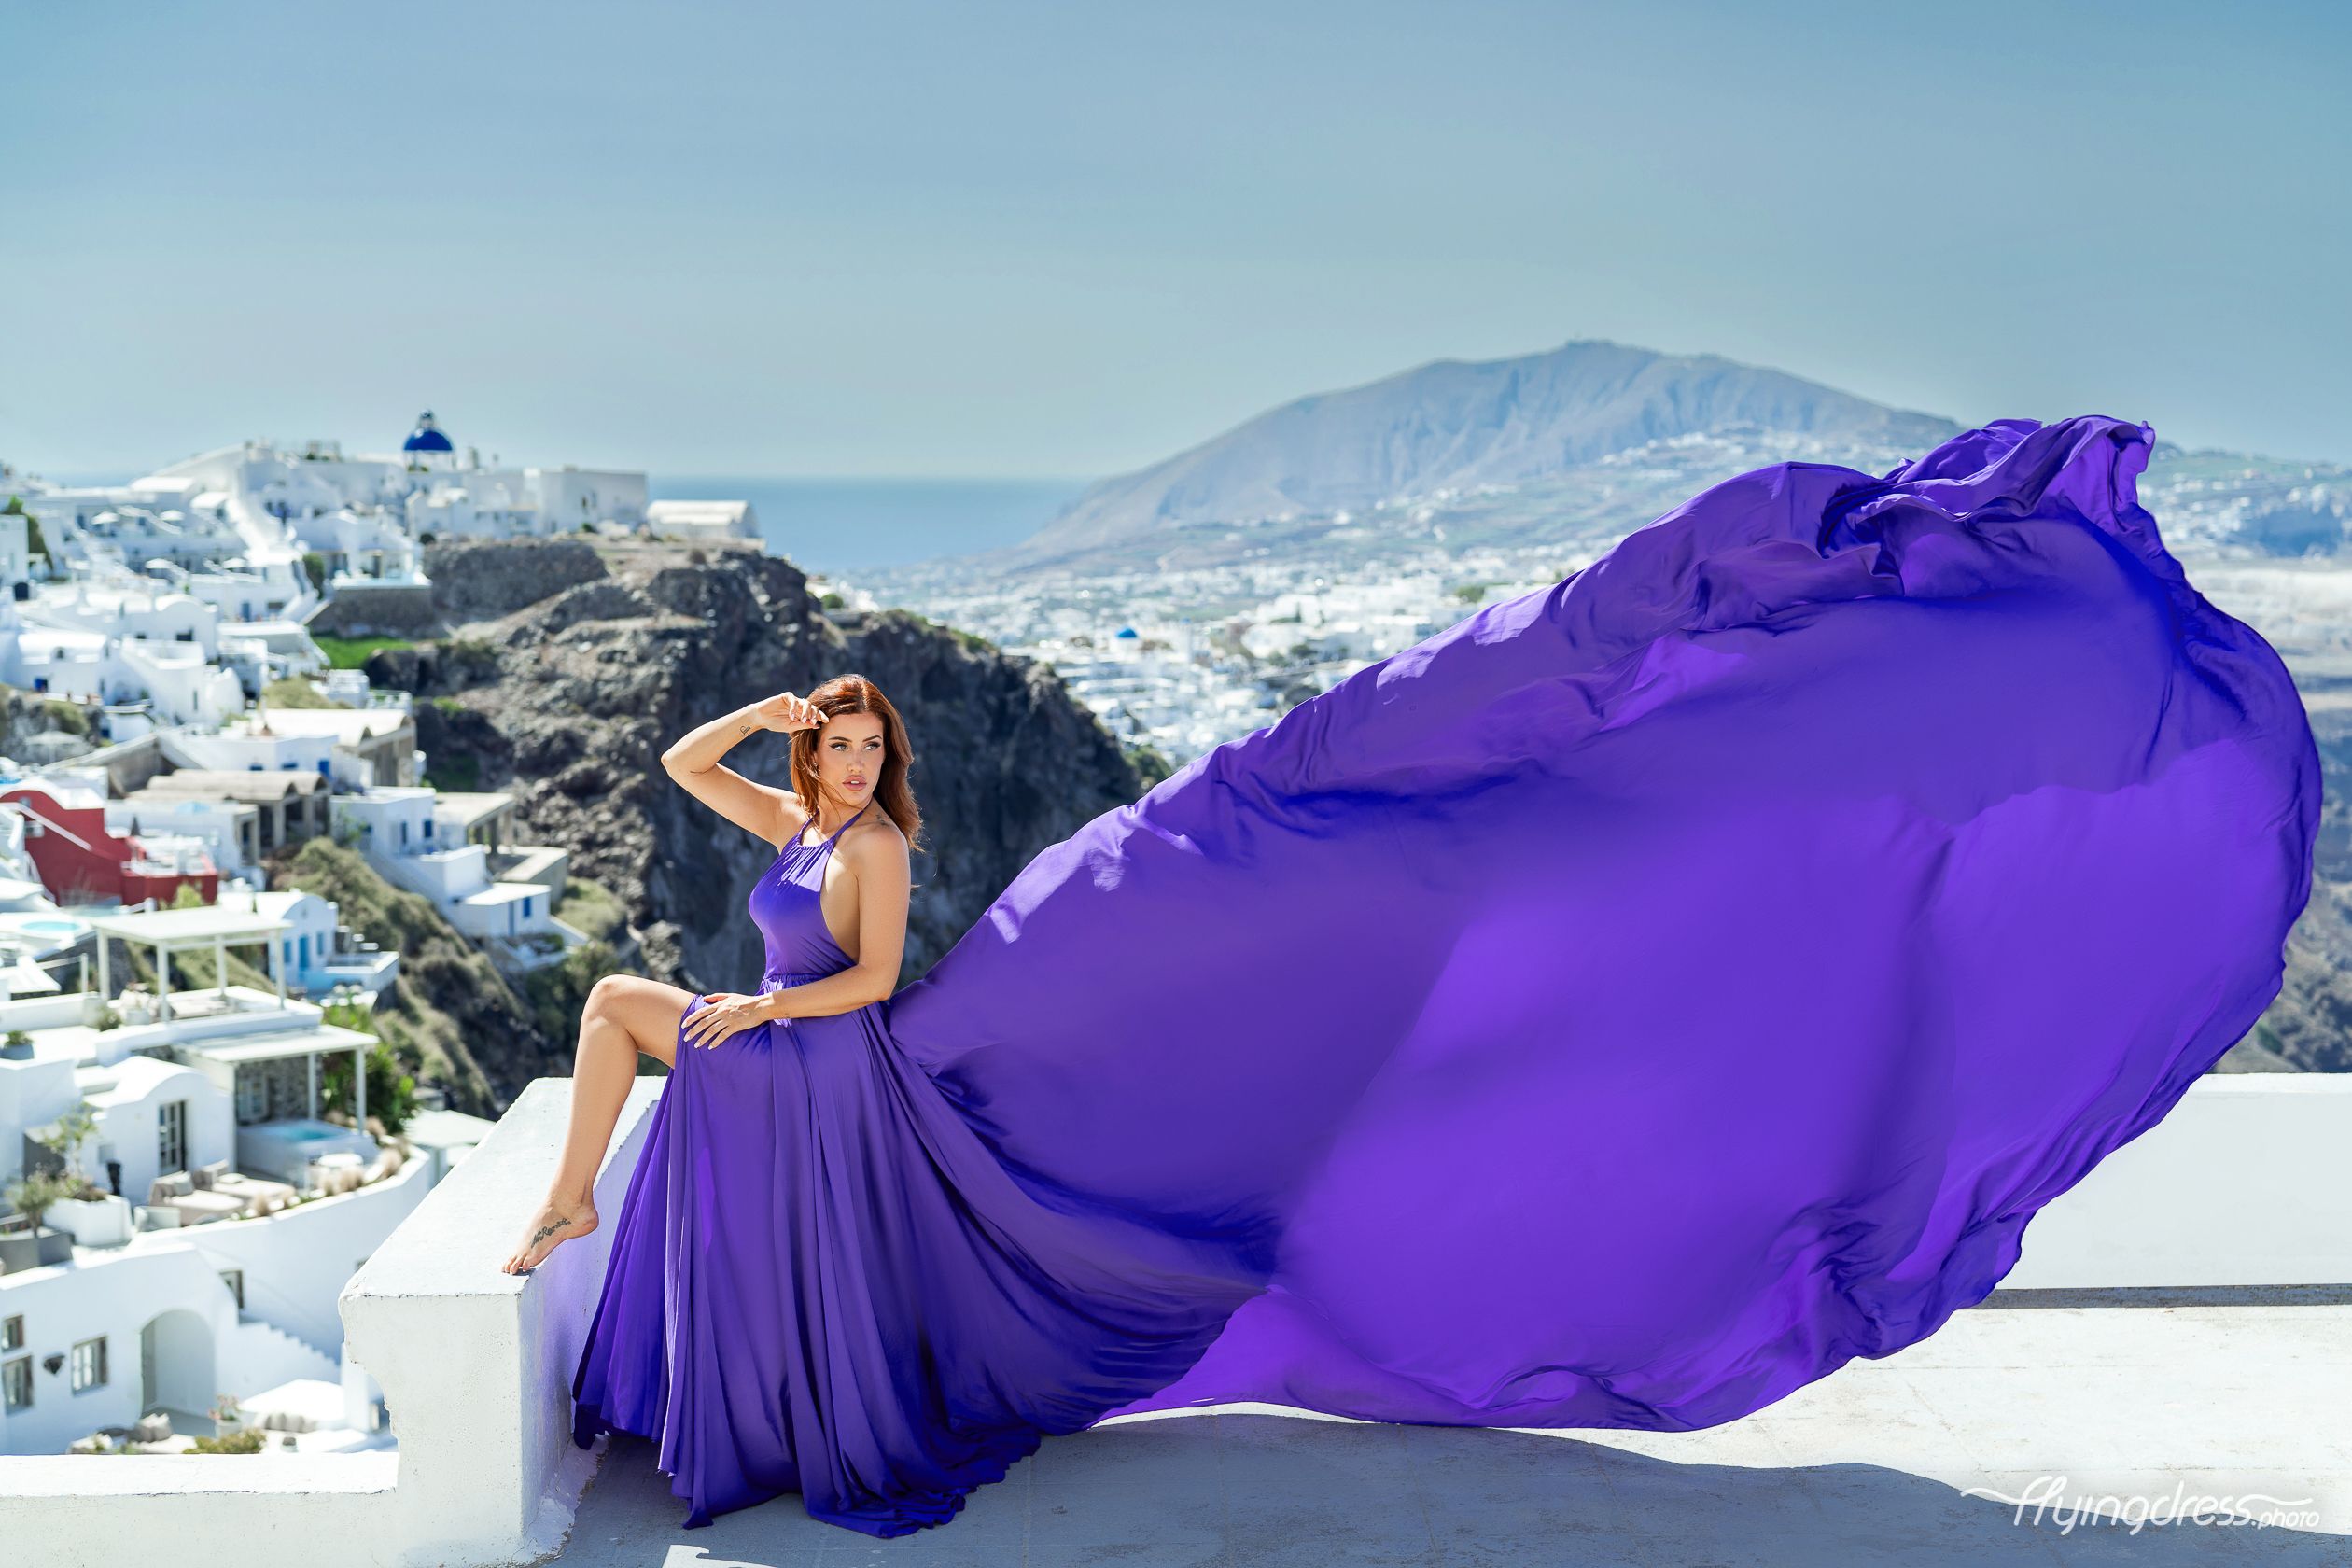 A woman in a stunning, flowing purple dress poses gracefully on a terrace with a scenic backdrop of white buildings and mountains by the sea.